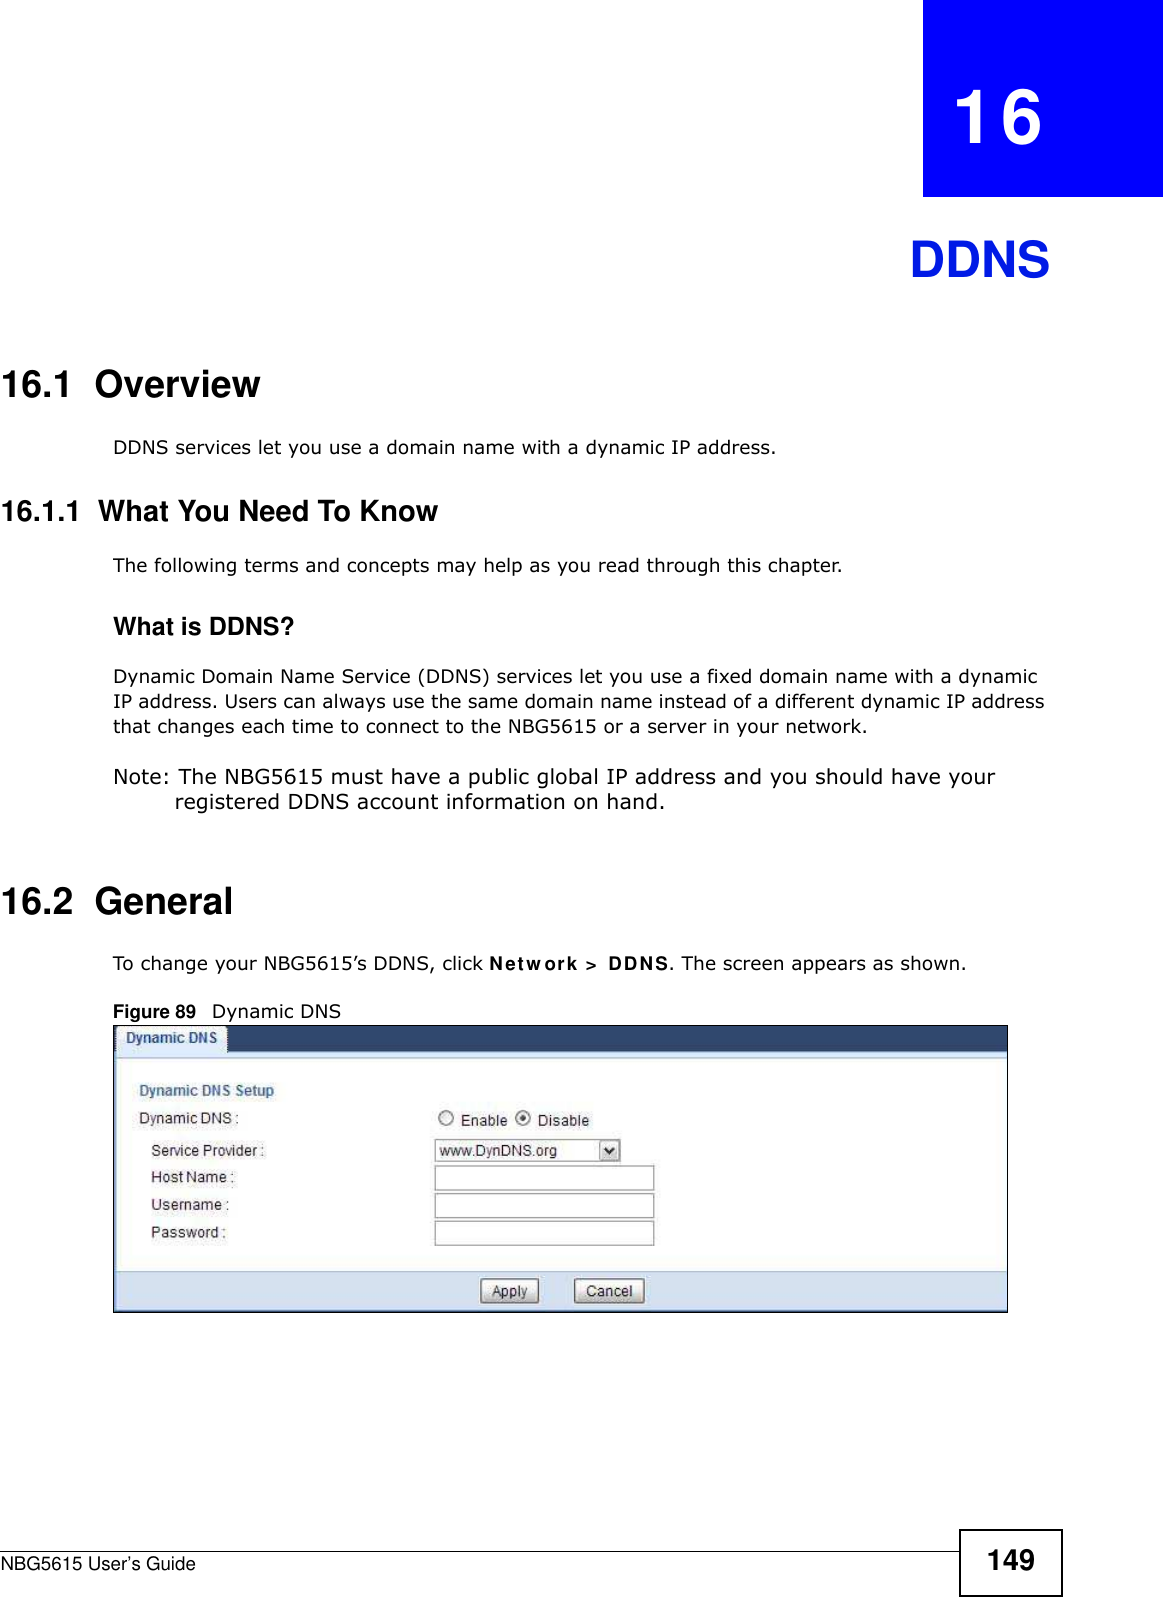 NBG5615 User’s Guide 149CHAPTER   16DDNS16.1  Overview DDNS services let you use a domain name with a dynamic IP address.16.1.1  What You Need To KnowThe following terms and concepts may help as you read through this chapter.What is DDNS?Dynamic Domain Name Service (DDNS) services let you use a fixed domain name with a dynamic IP address. Users can always use the same domain name instead of a different dynamic IP address that changes each time to connect to the NBG5615 or a server in your network.Note: The NBG5615 must have a public global IP address and you should have your registered DDNS account information on hand.16.2  General   To change your NBG5615’s DDNS, click Netw ork &gt;  DDNS. The screen appears as shown.Figure 89   Dynamic DNS